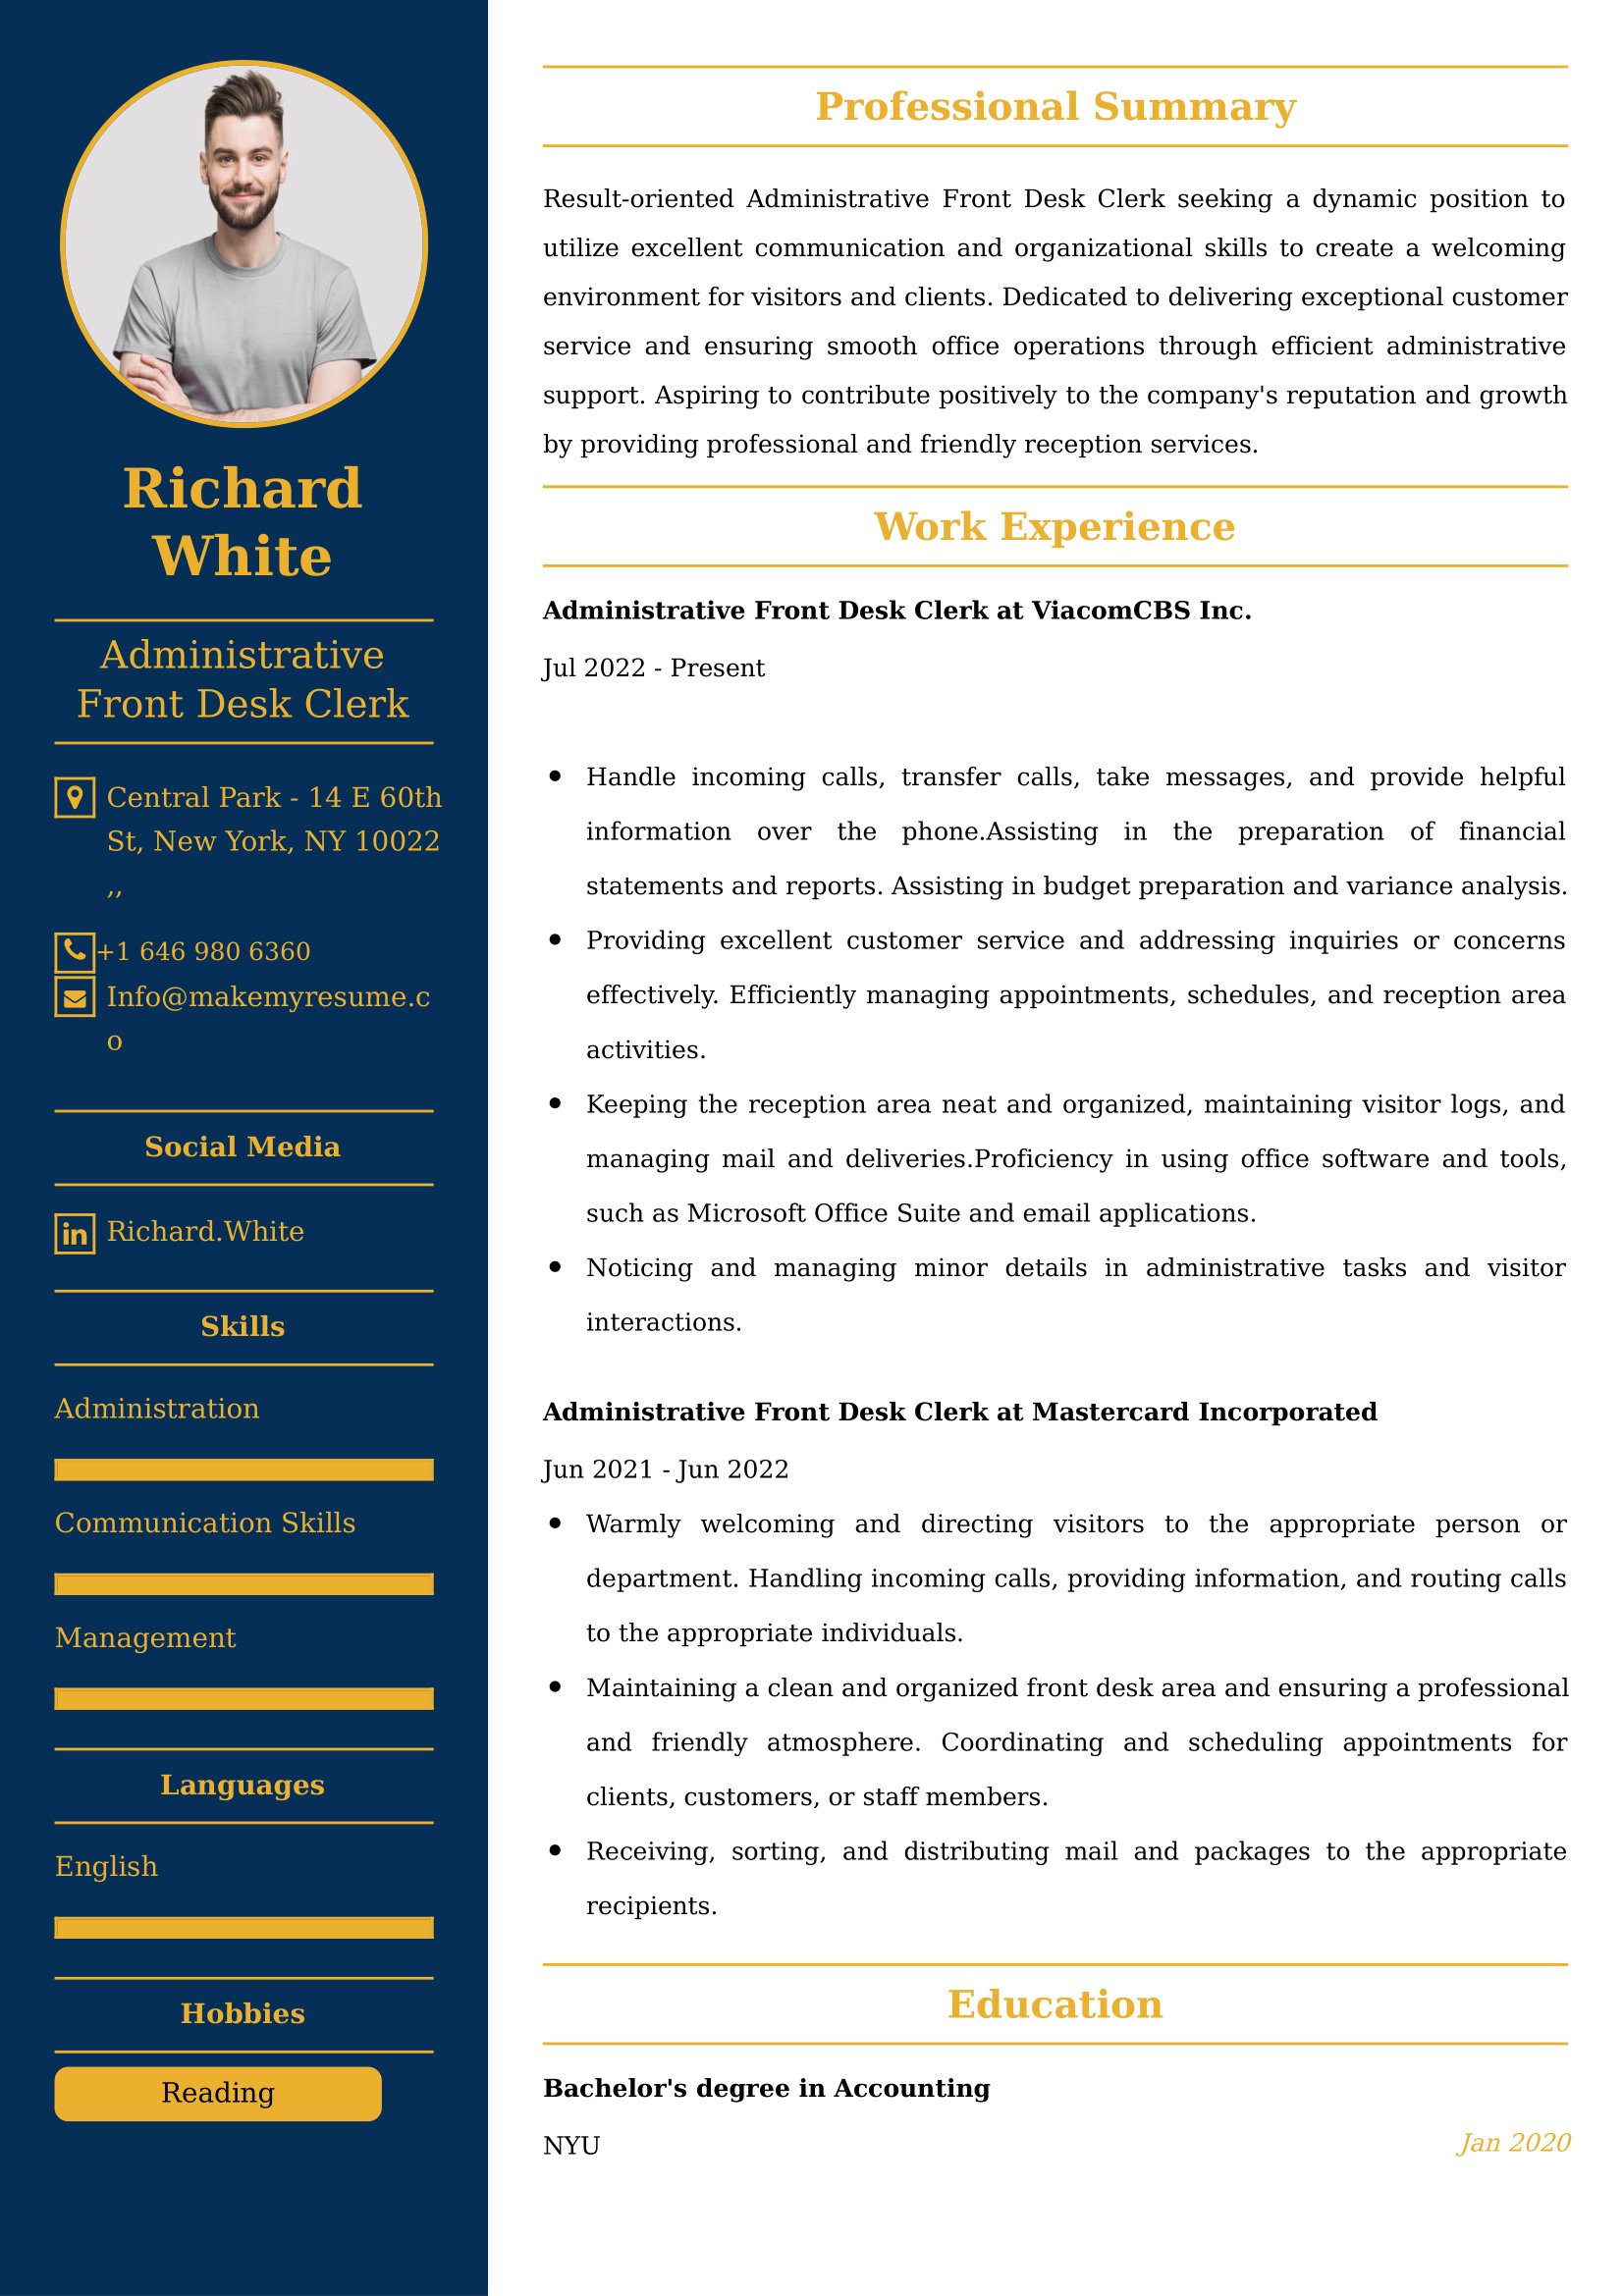 Administrative Front Desk Clerk Resume Examples - Brazilian Format, Latest Template